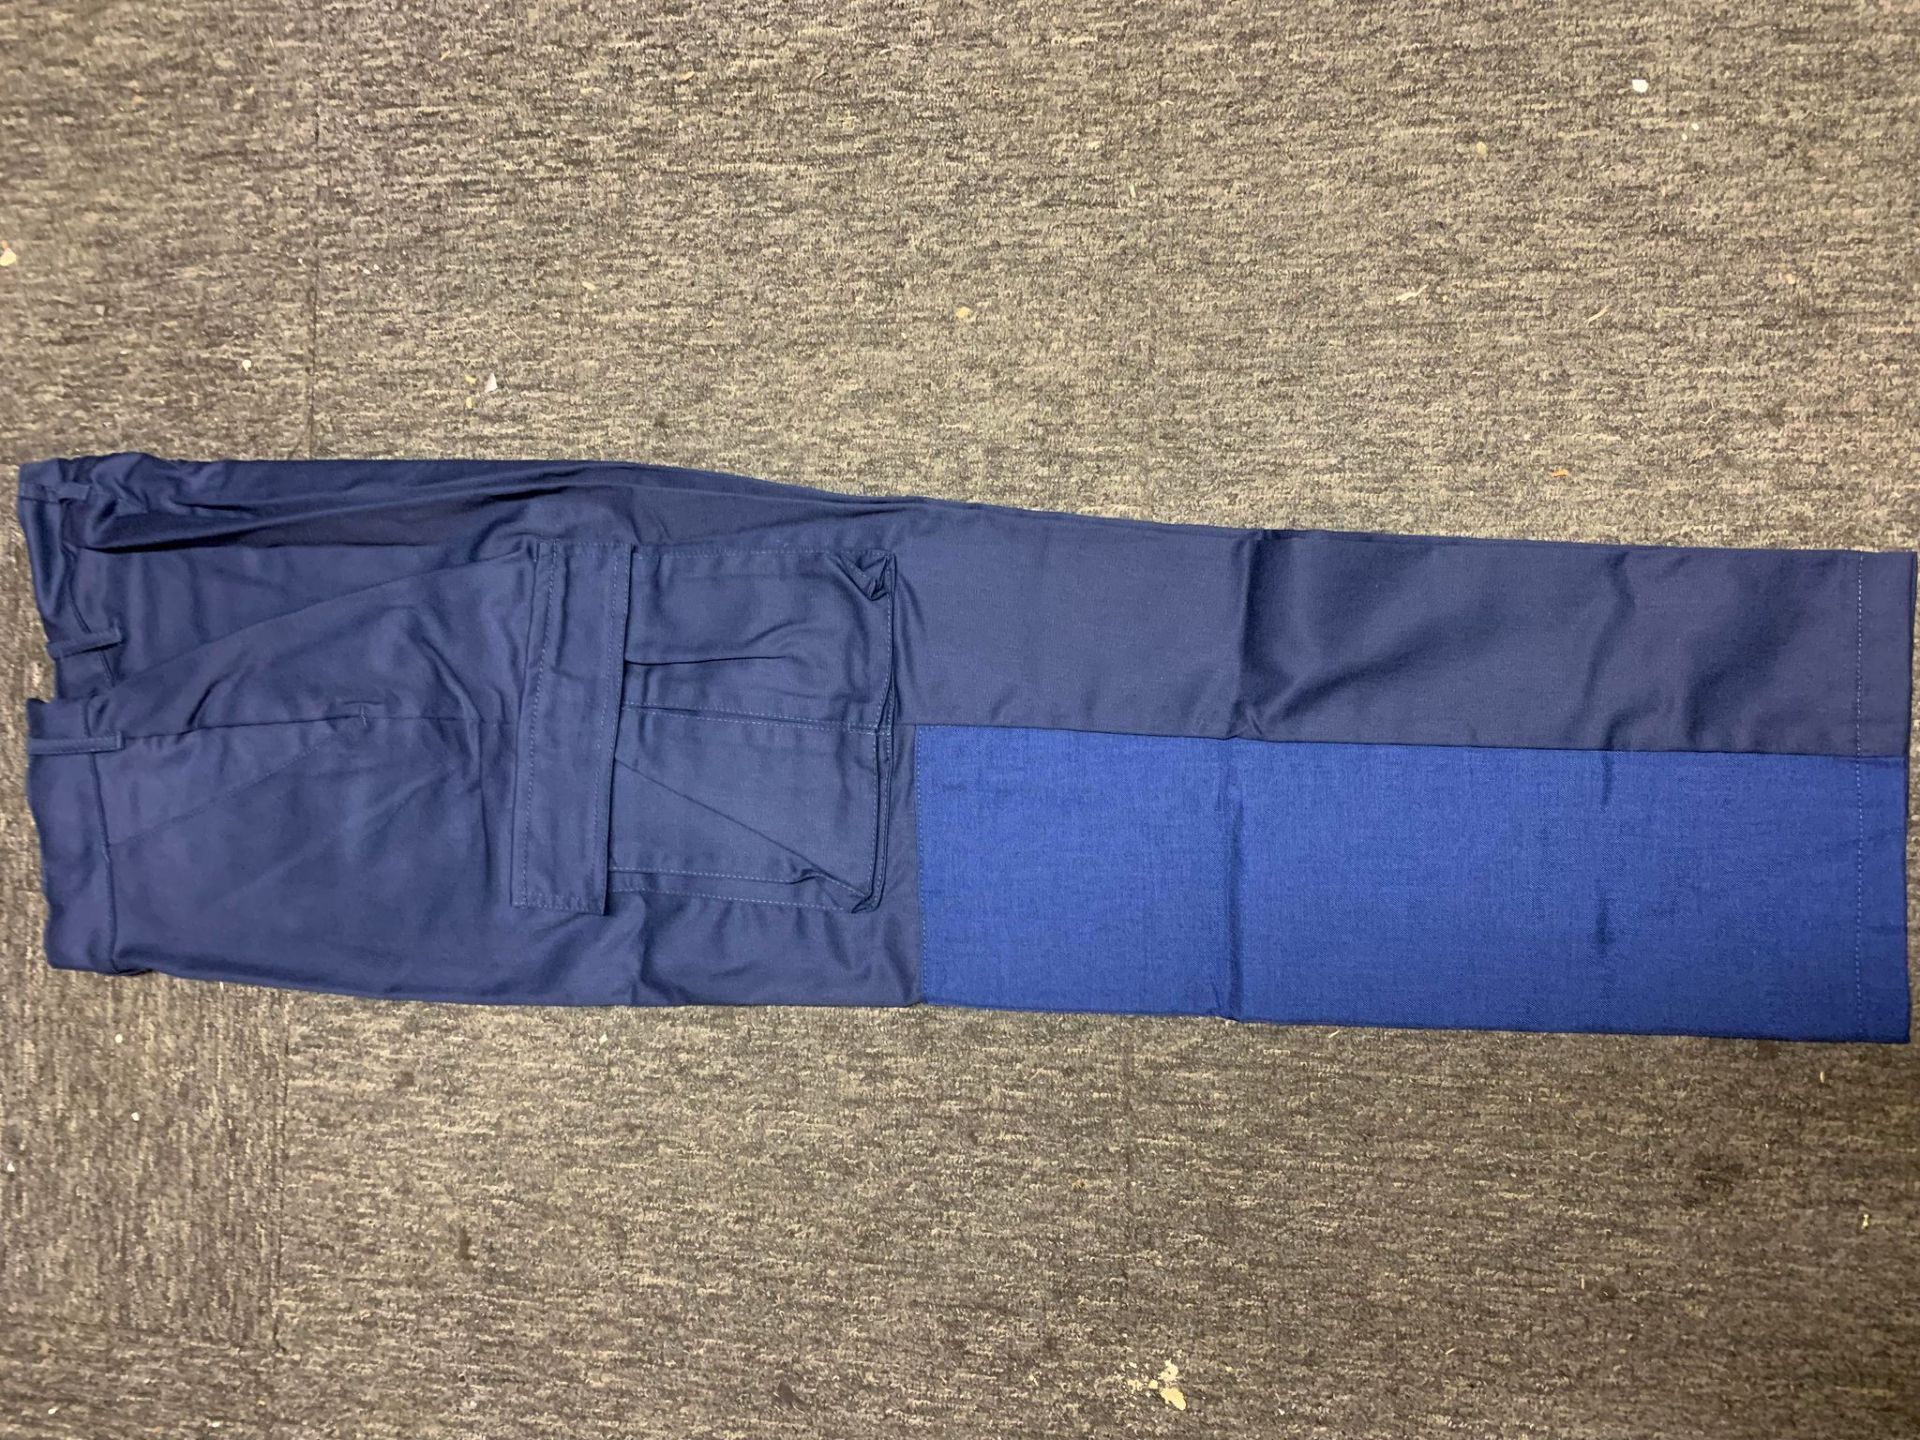 WORKING TROUSERS ALL NEW IN BAGS 480 UNITS MIXED SIZES - Image 2 of 4